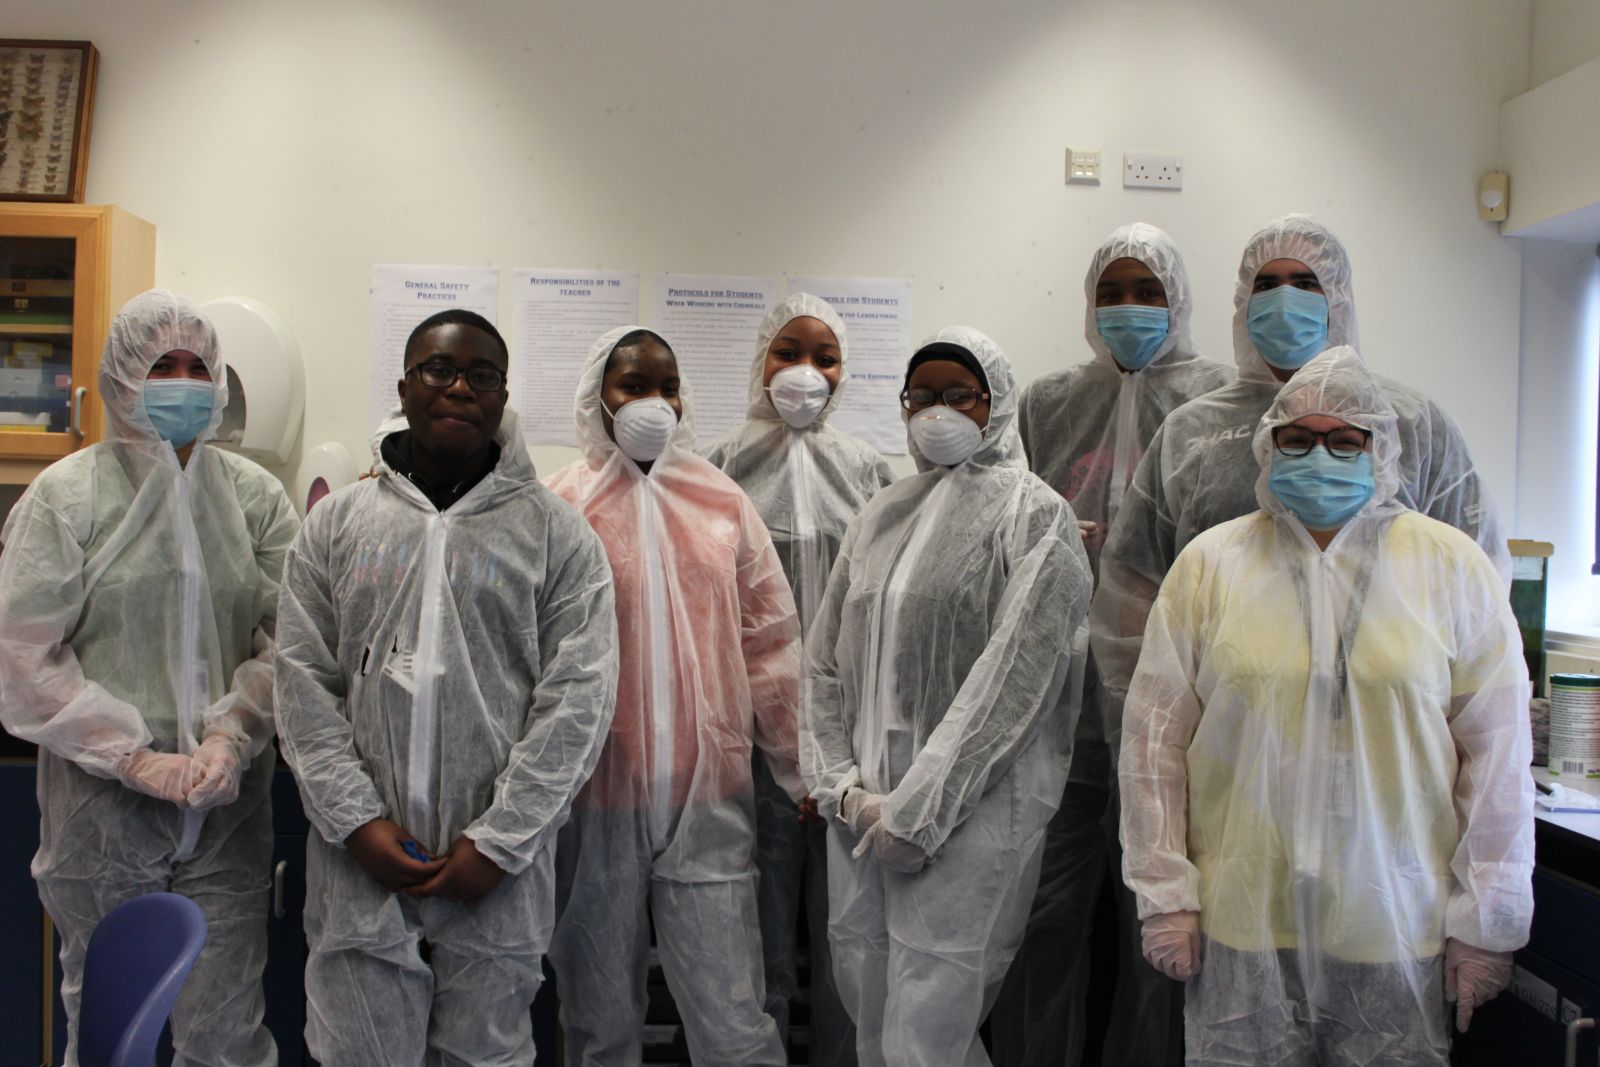 Applied Science students at John Ruskin College investigate a mock crime scene